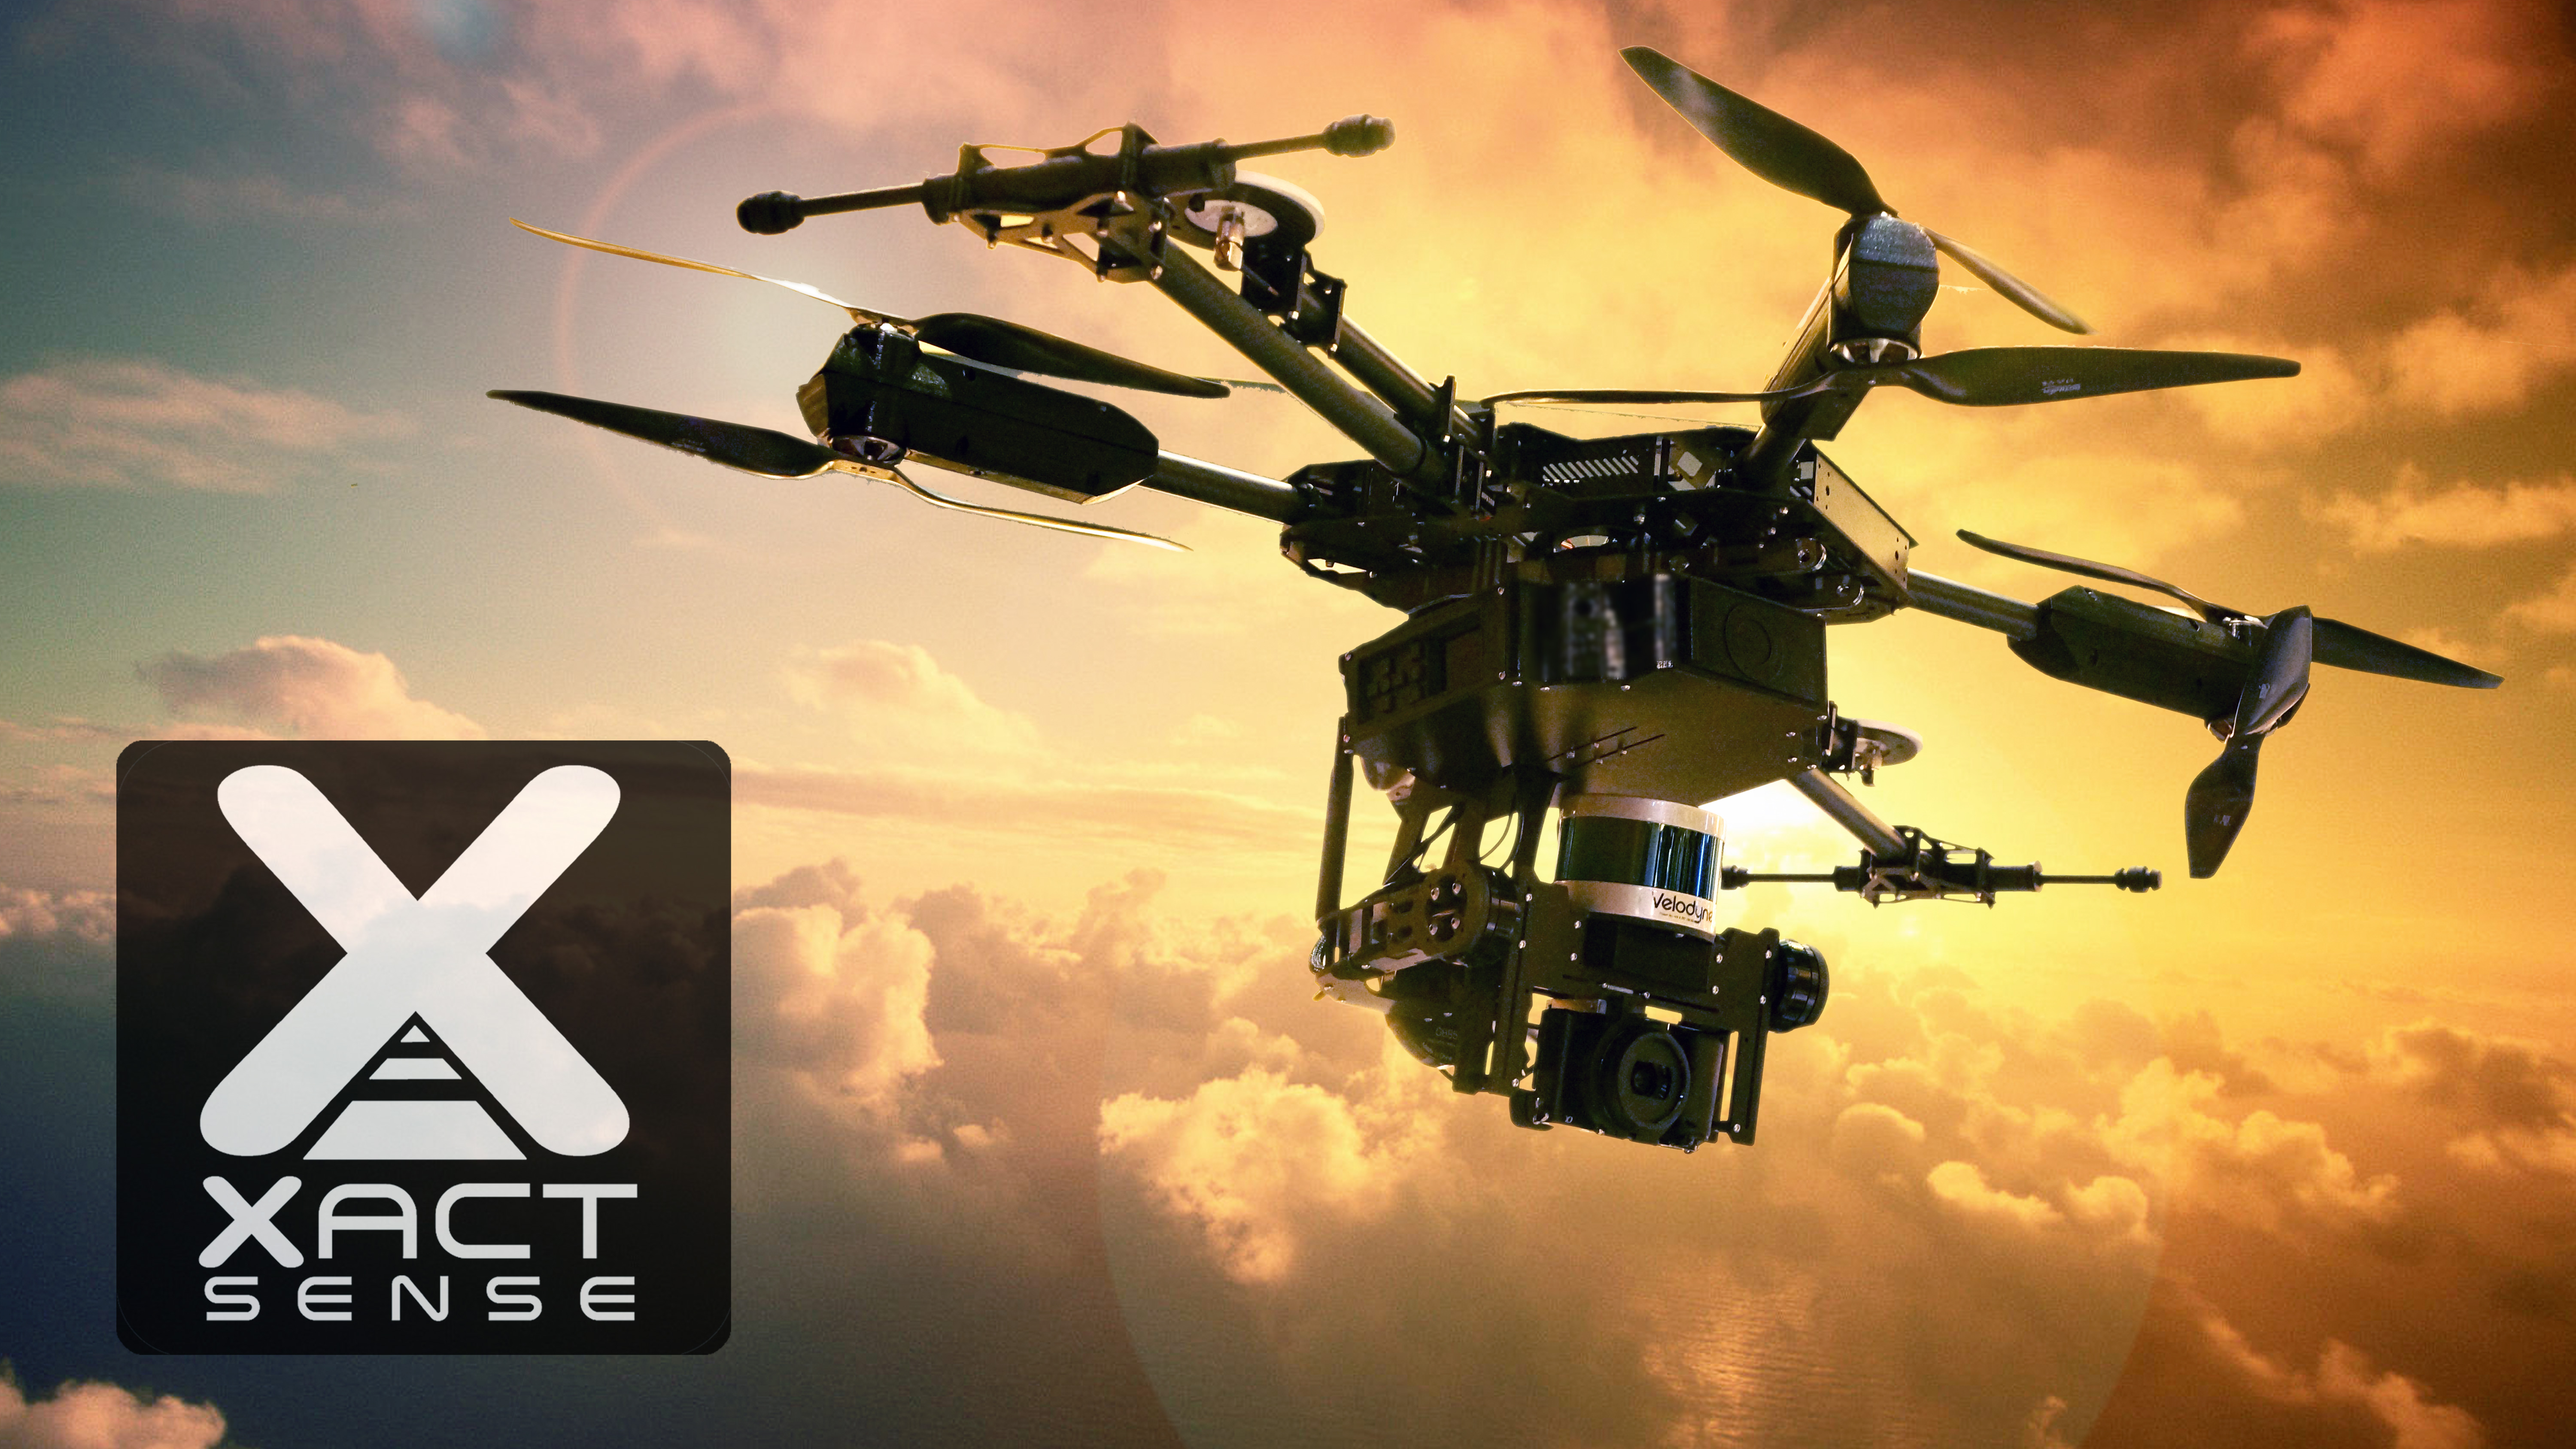 Laser Scanning Drones: XactSense is First to Fly Velodyne’s New Low